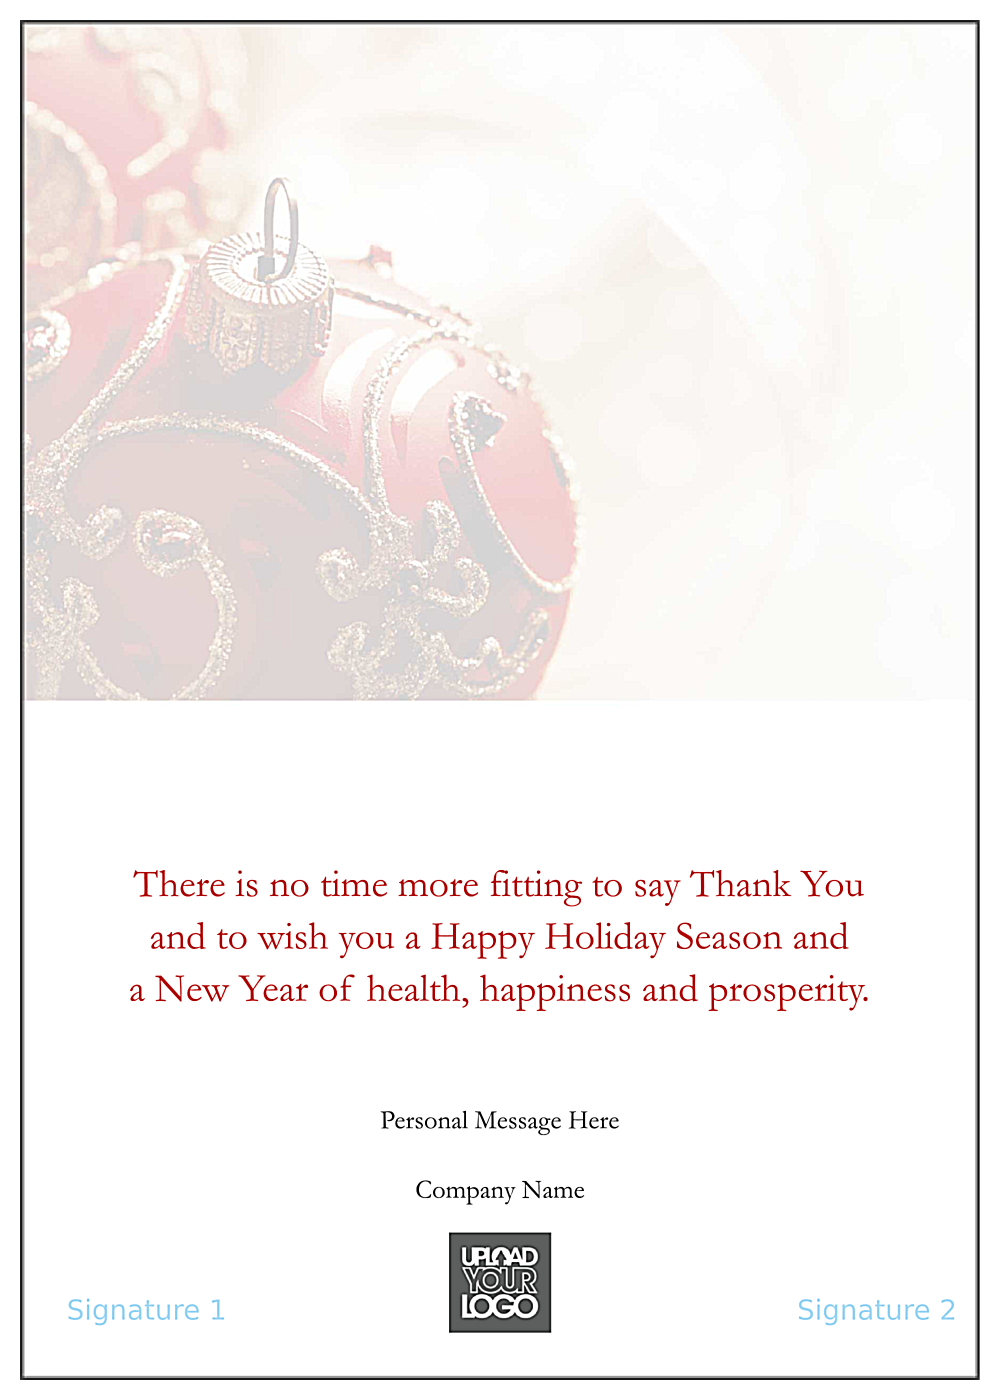 Red Christmas Ornament back - Greeting Cards Maker